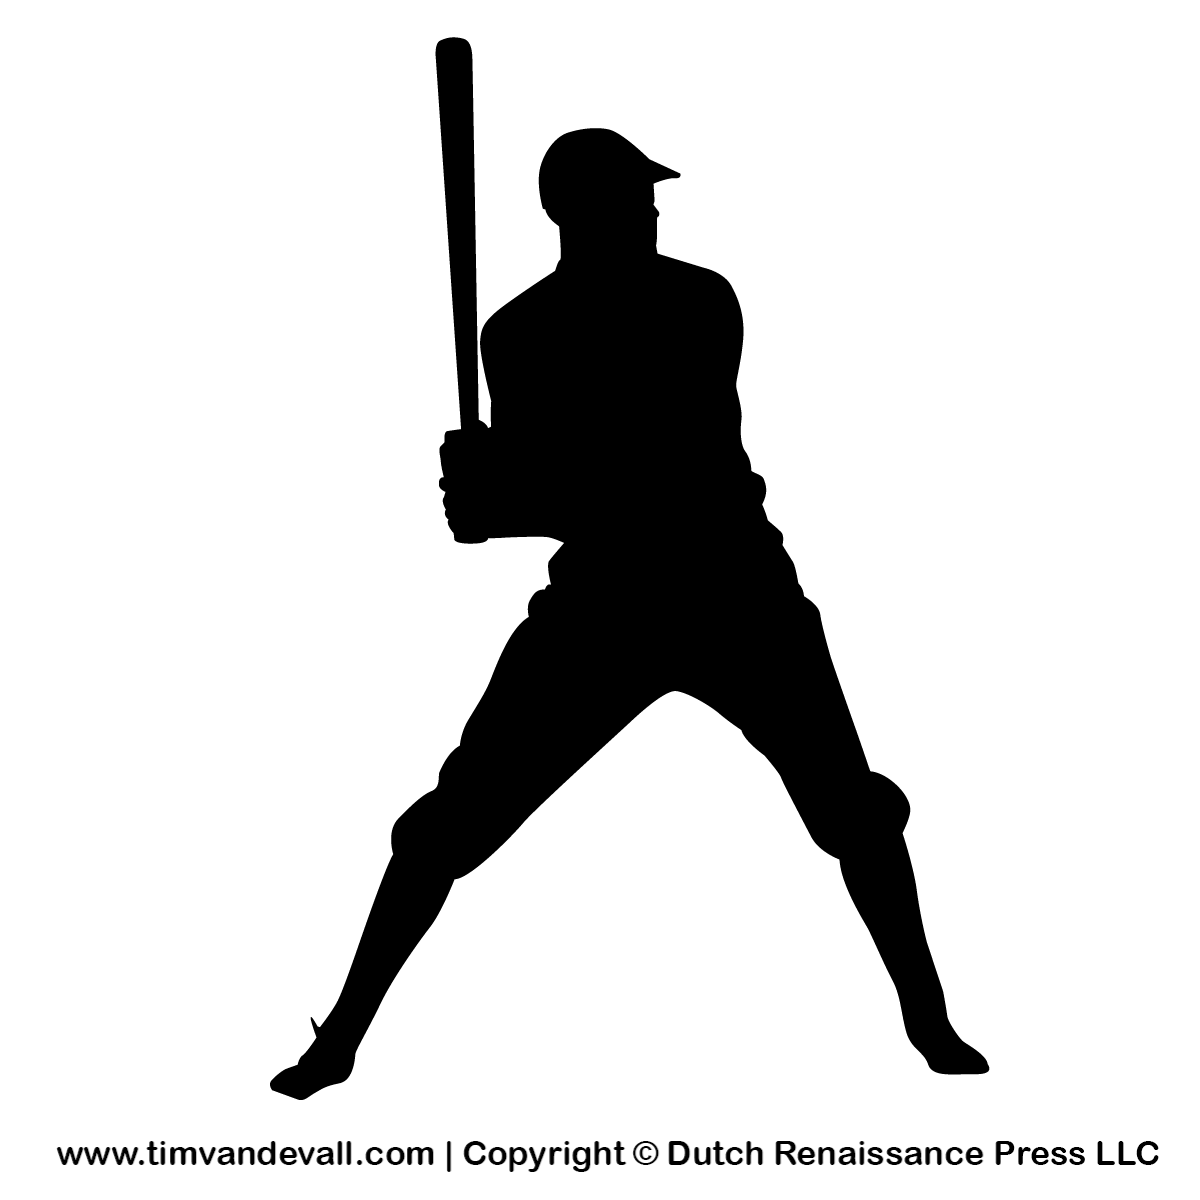 free clipart baseball player silhouette - photo #15